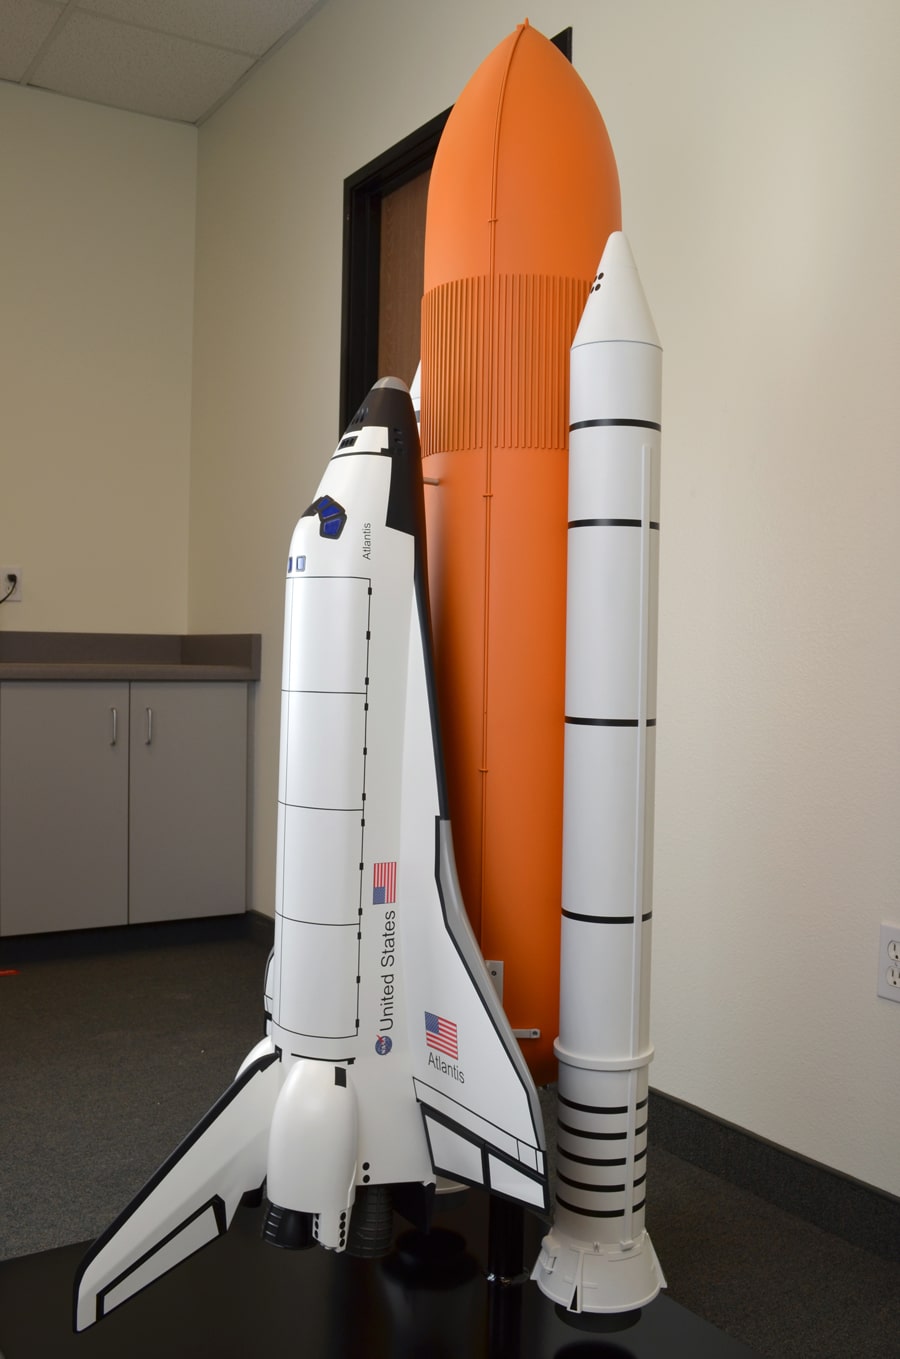 32nd Scale Space Shuttle Spacecraft Model